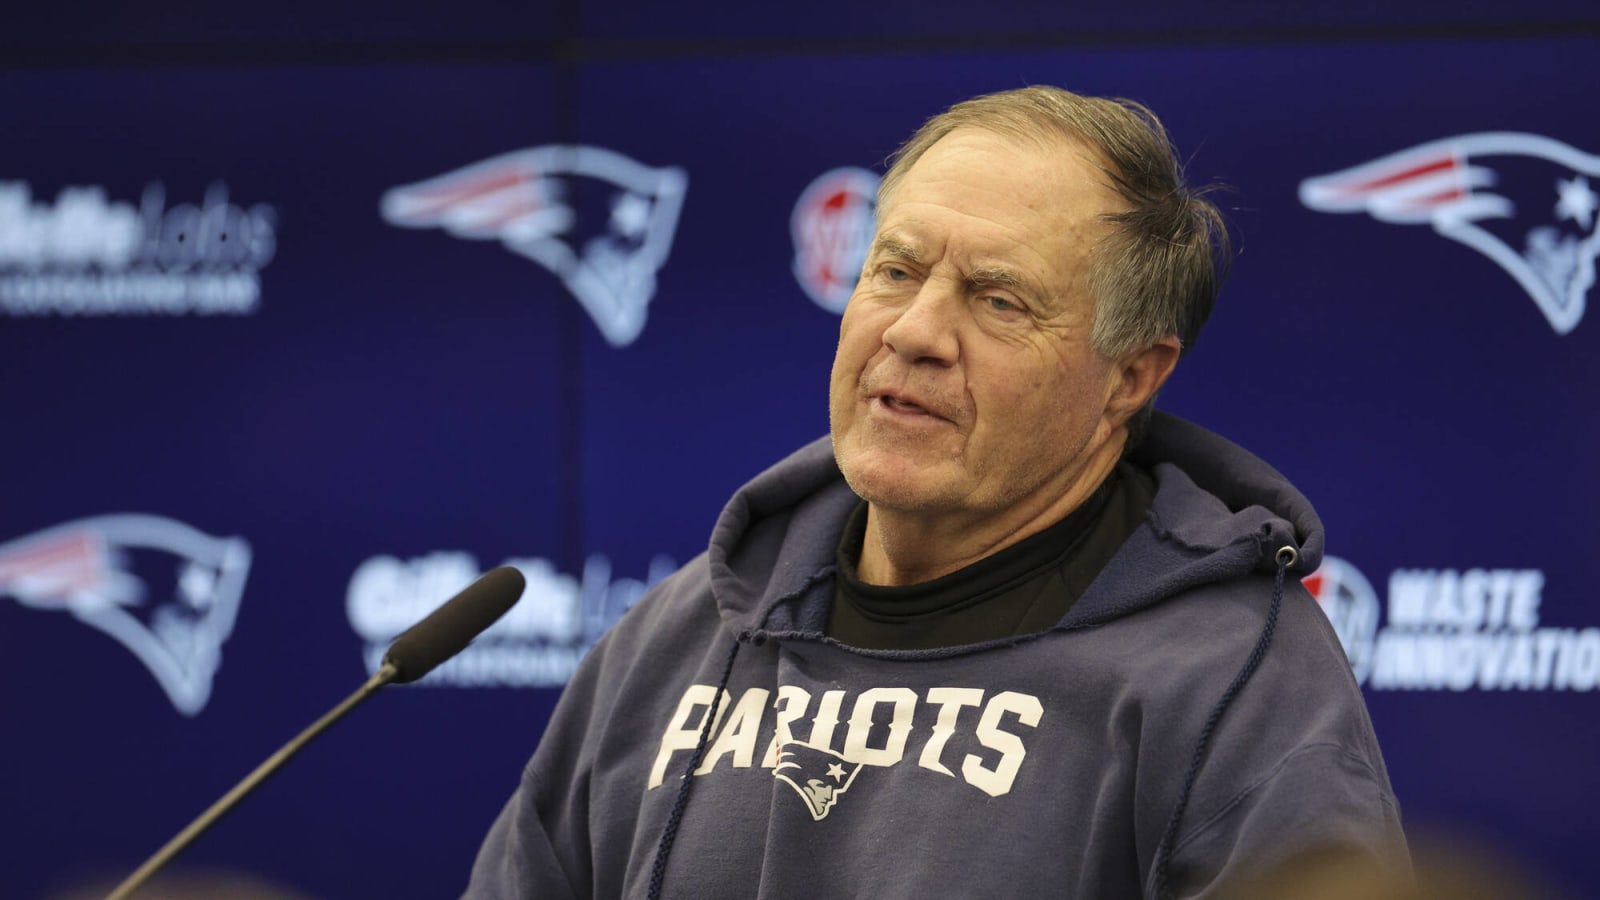 Insider explains why Patriots likely won't fire Bill Belichick midseason